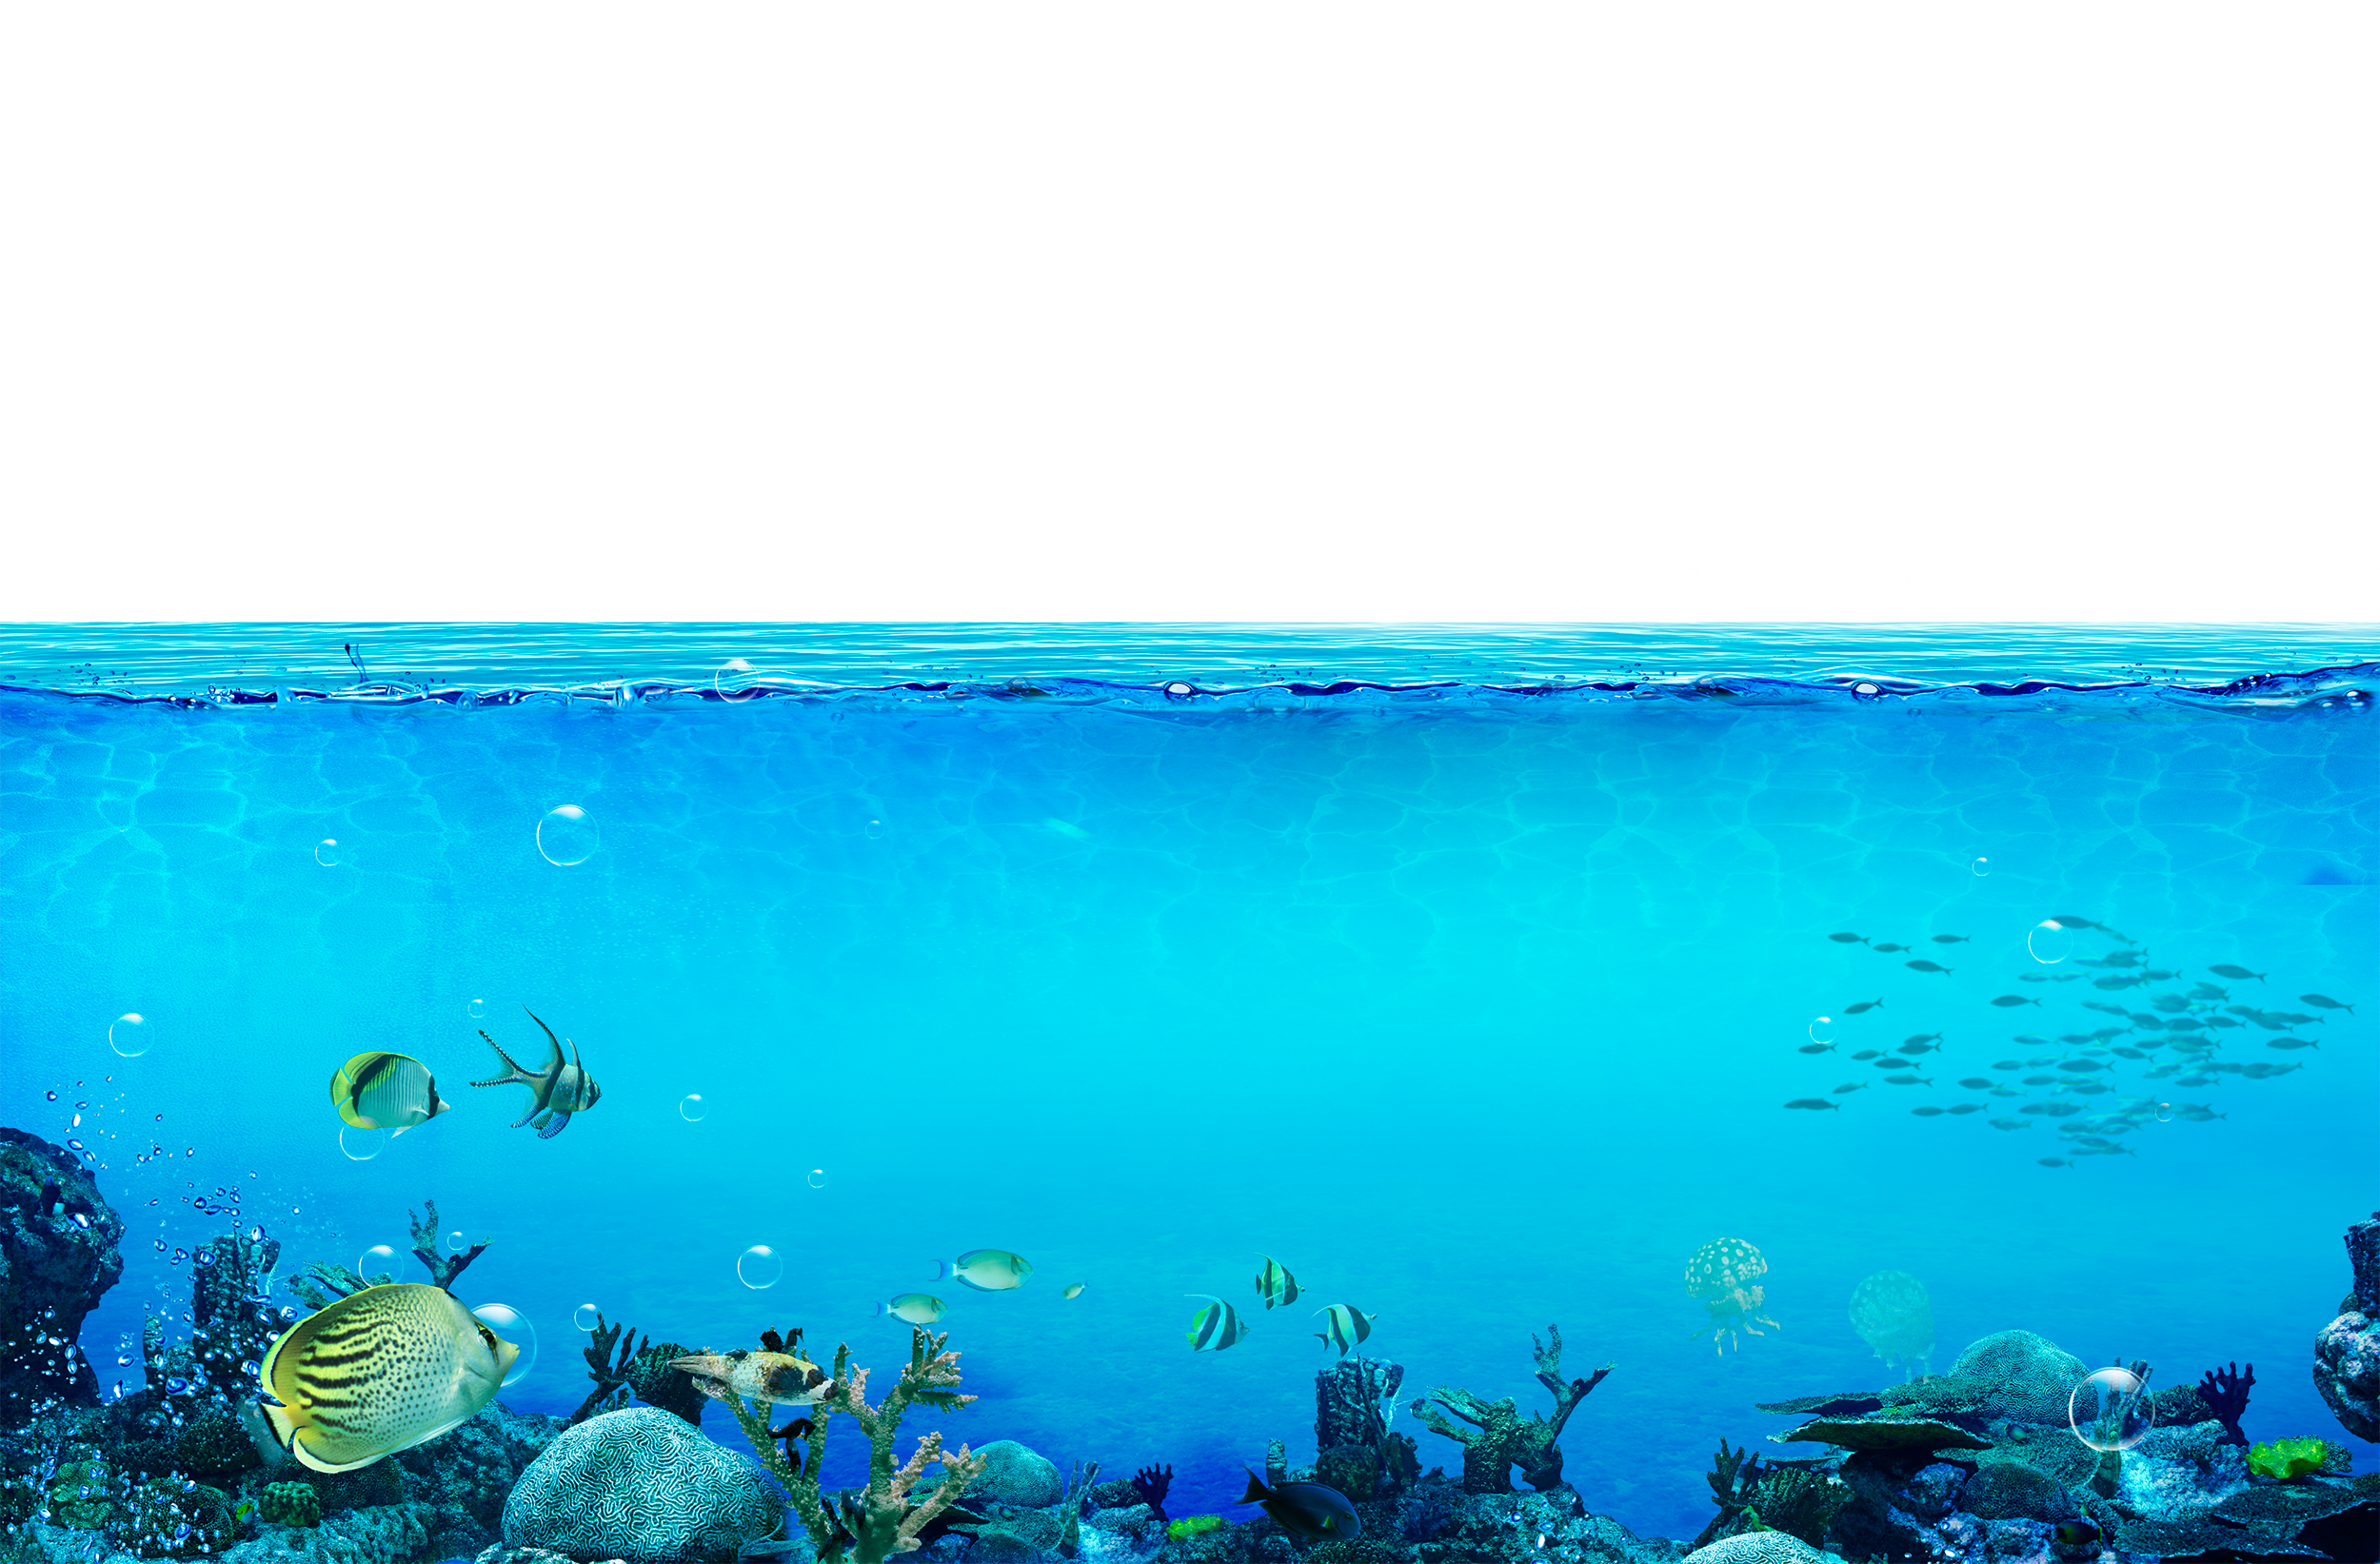 Underwater The Wallpaper Sea World HD Image Free PNG Clipart